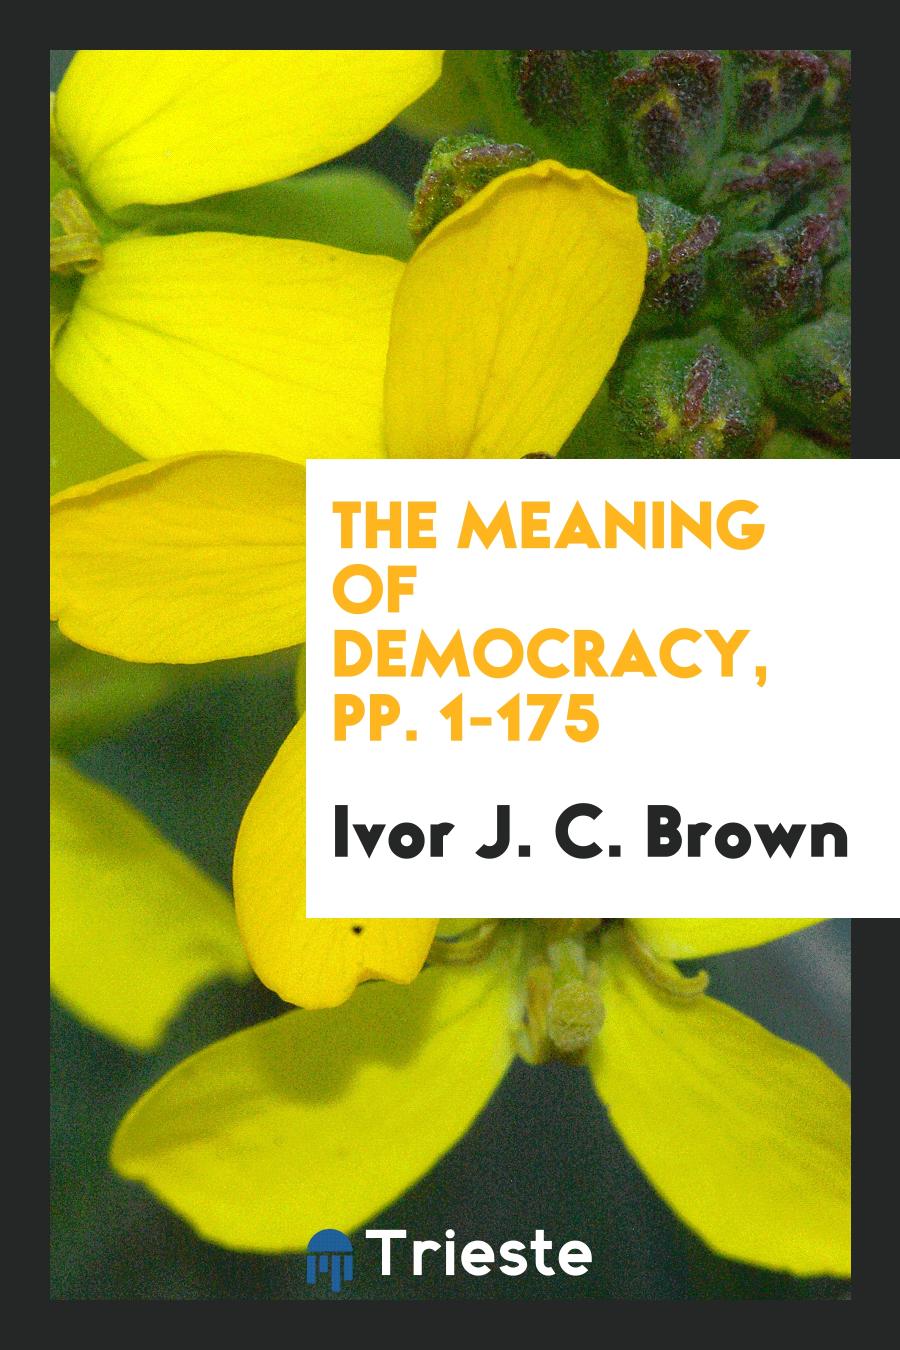 The Meaning of Democracy, pp. 1-175